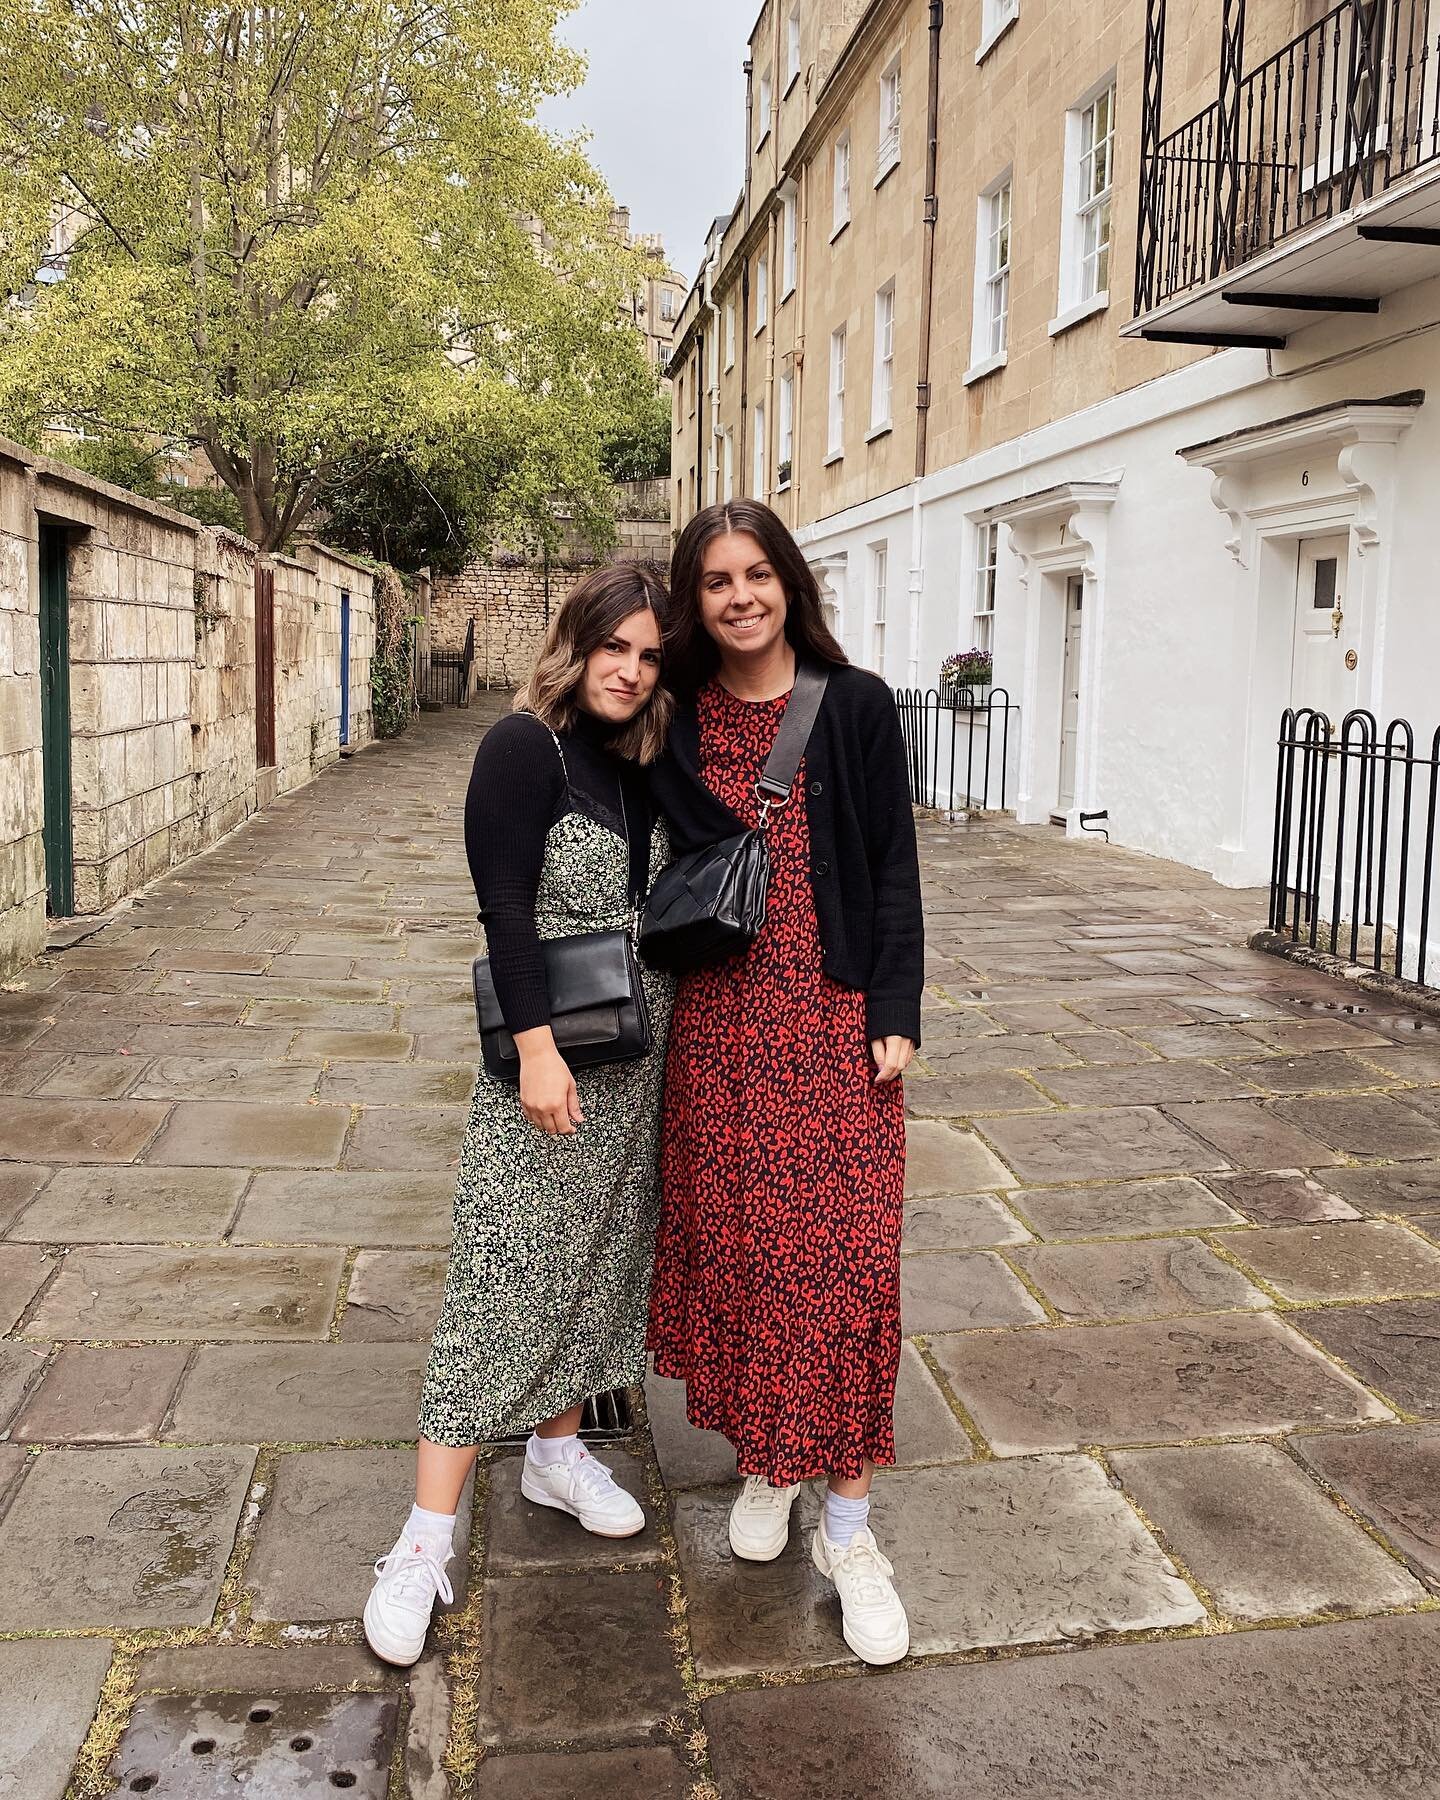 A little weekend in bath ~photo dump~ with the girls, and because it&rsquo;s been some time since @sweetmondayblog and I had a photo together 👩🏽&zwj;🤝&zwj;👩🏻